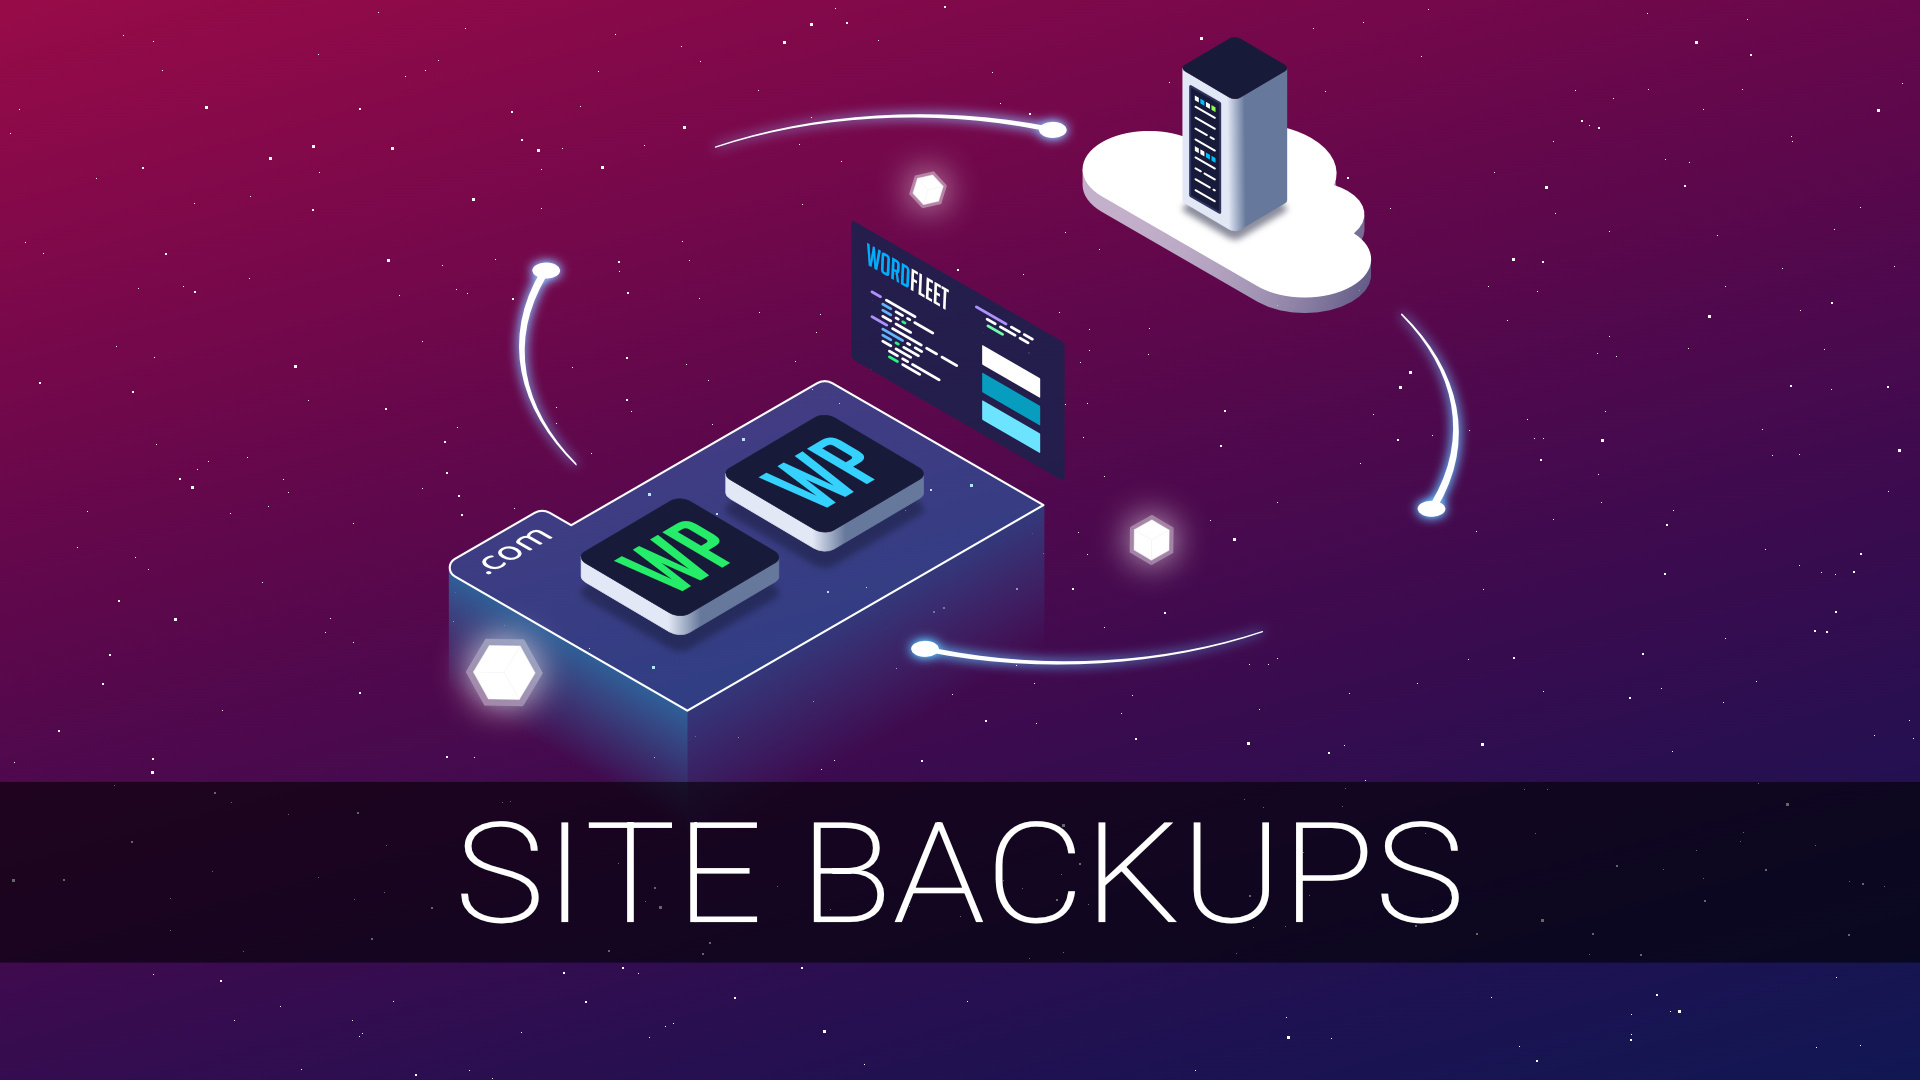 How to backup and restore a site